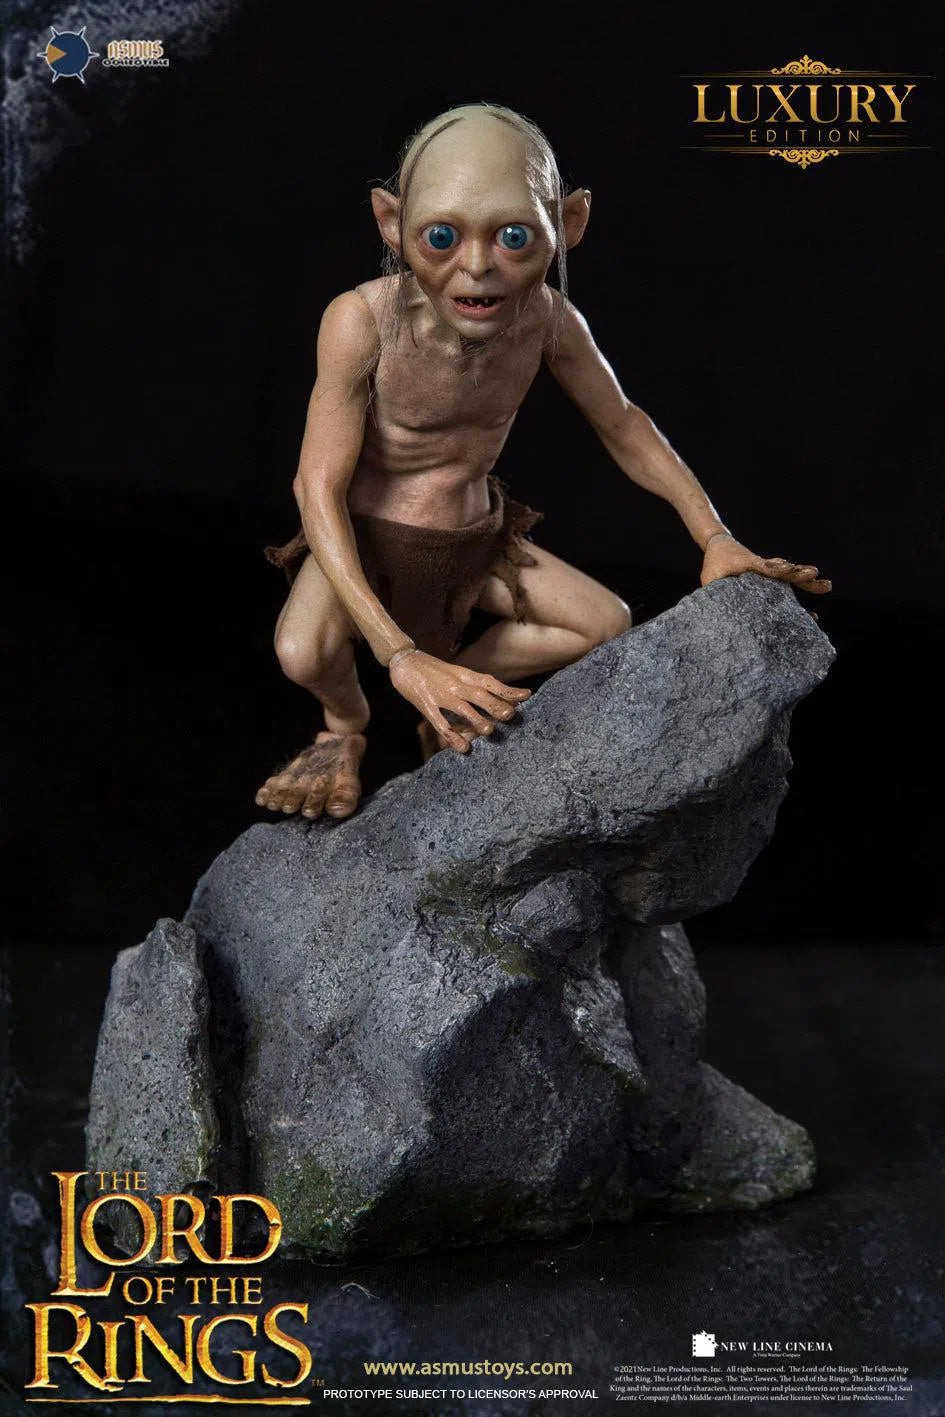 Gollum and Sméagol: Double Pack: Lord Of The Rings: Luxury Edition: Asmus: LOTR30LUX